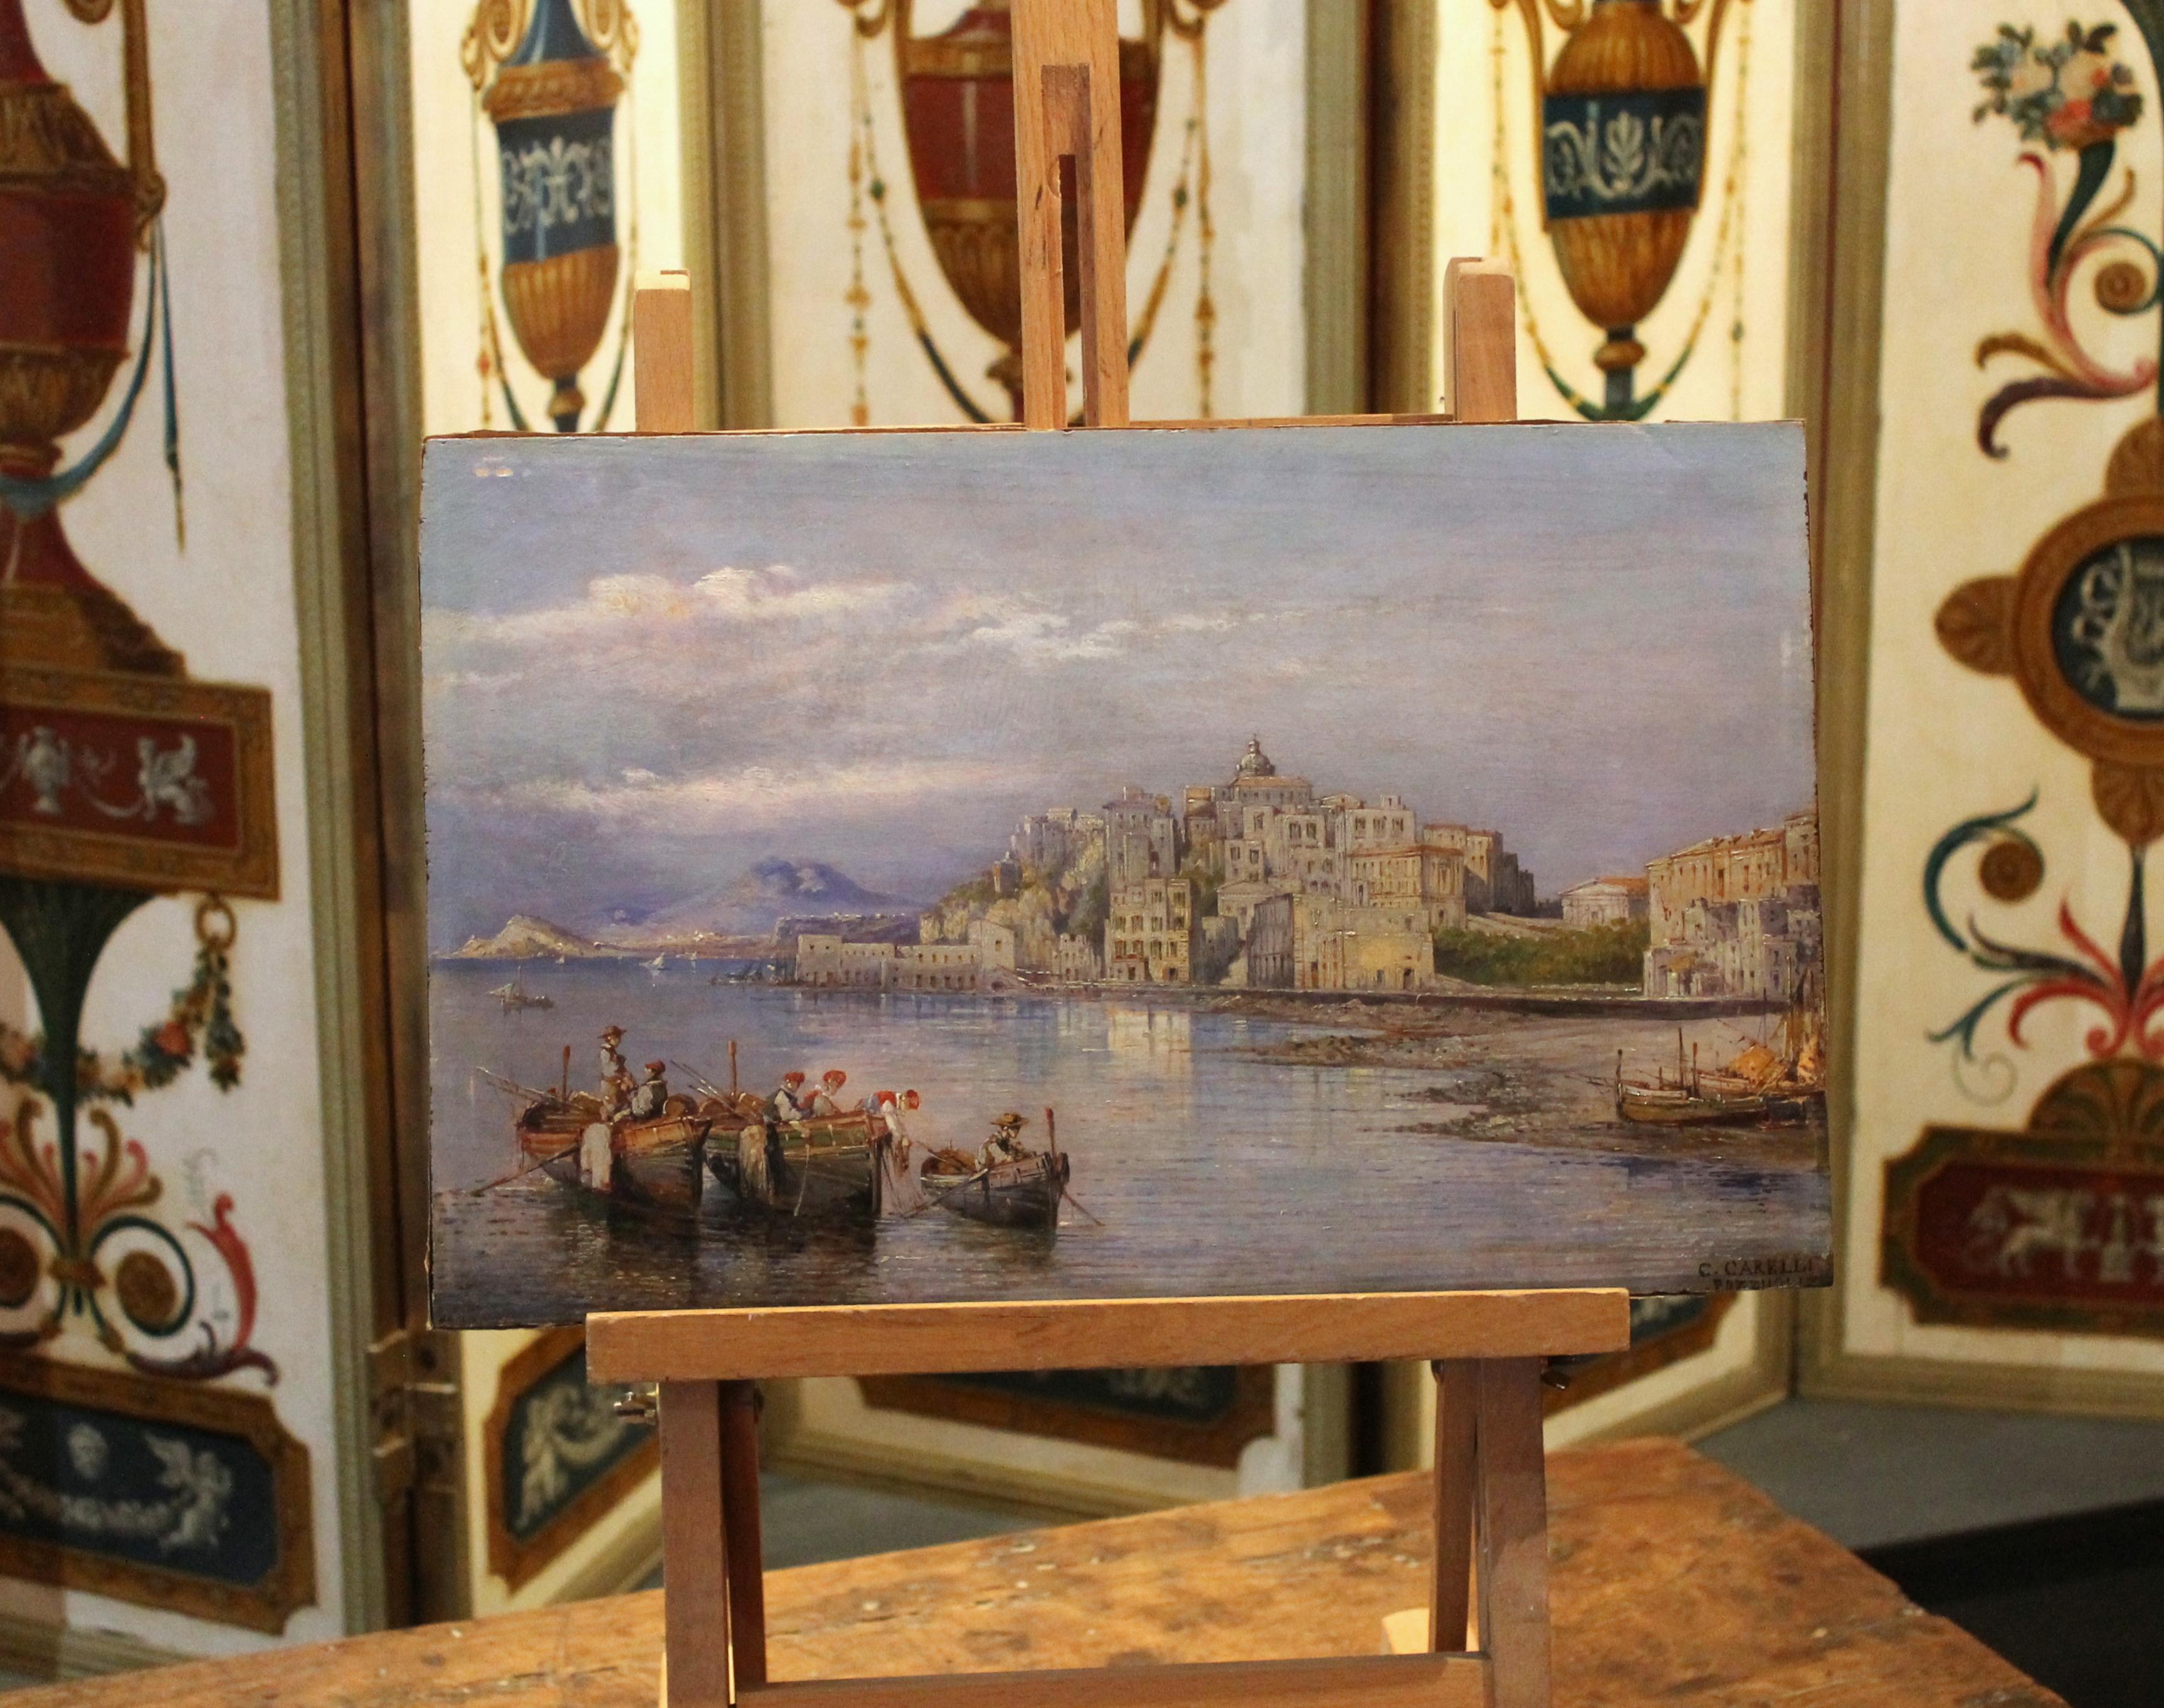 It’s a joy for the eyes and soul to admire the countless details of this village overlooking the sea of Naples’ bay with the mount Vesuvius on the background depicted in this old masters oil painting on board.
This awesome rectangular oil on panel